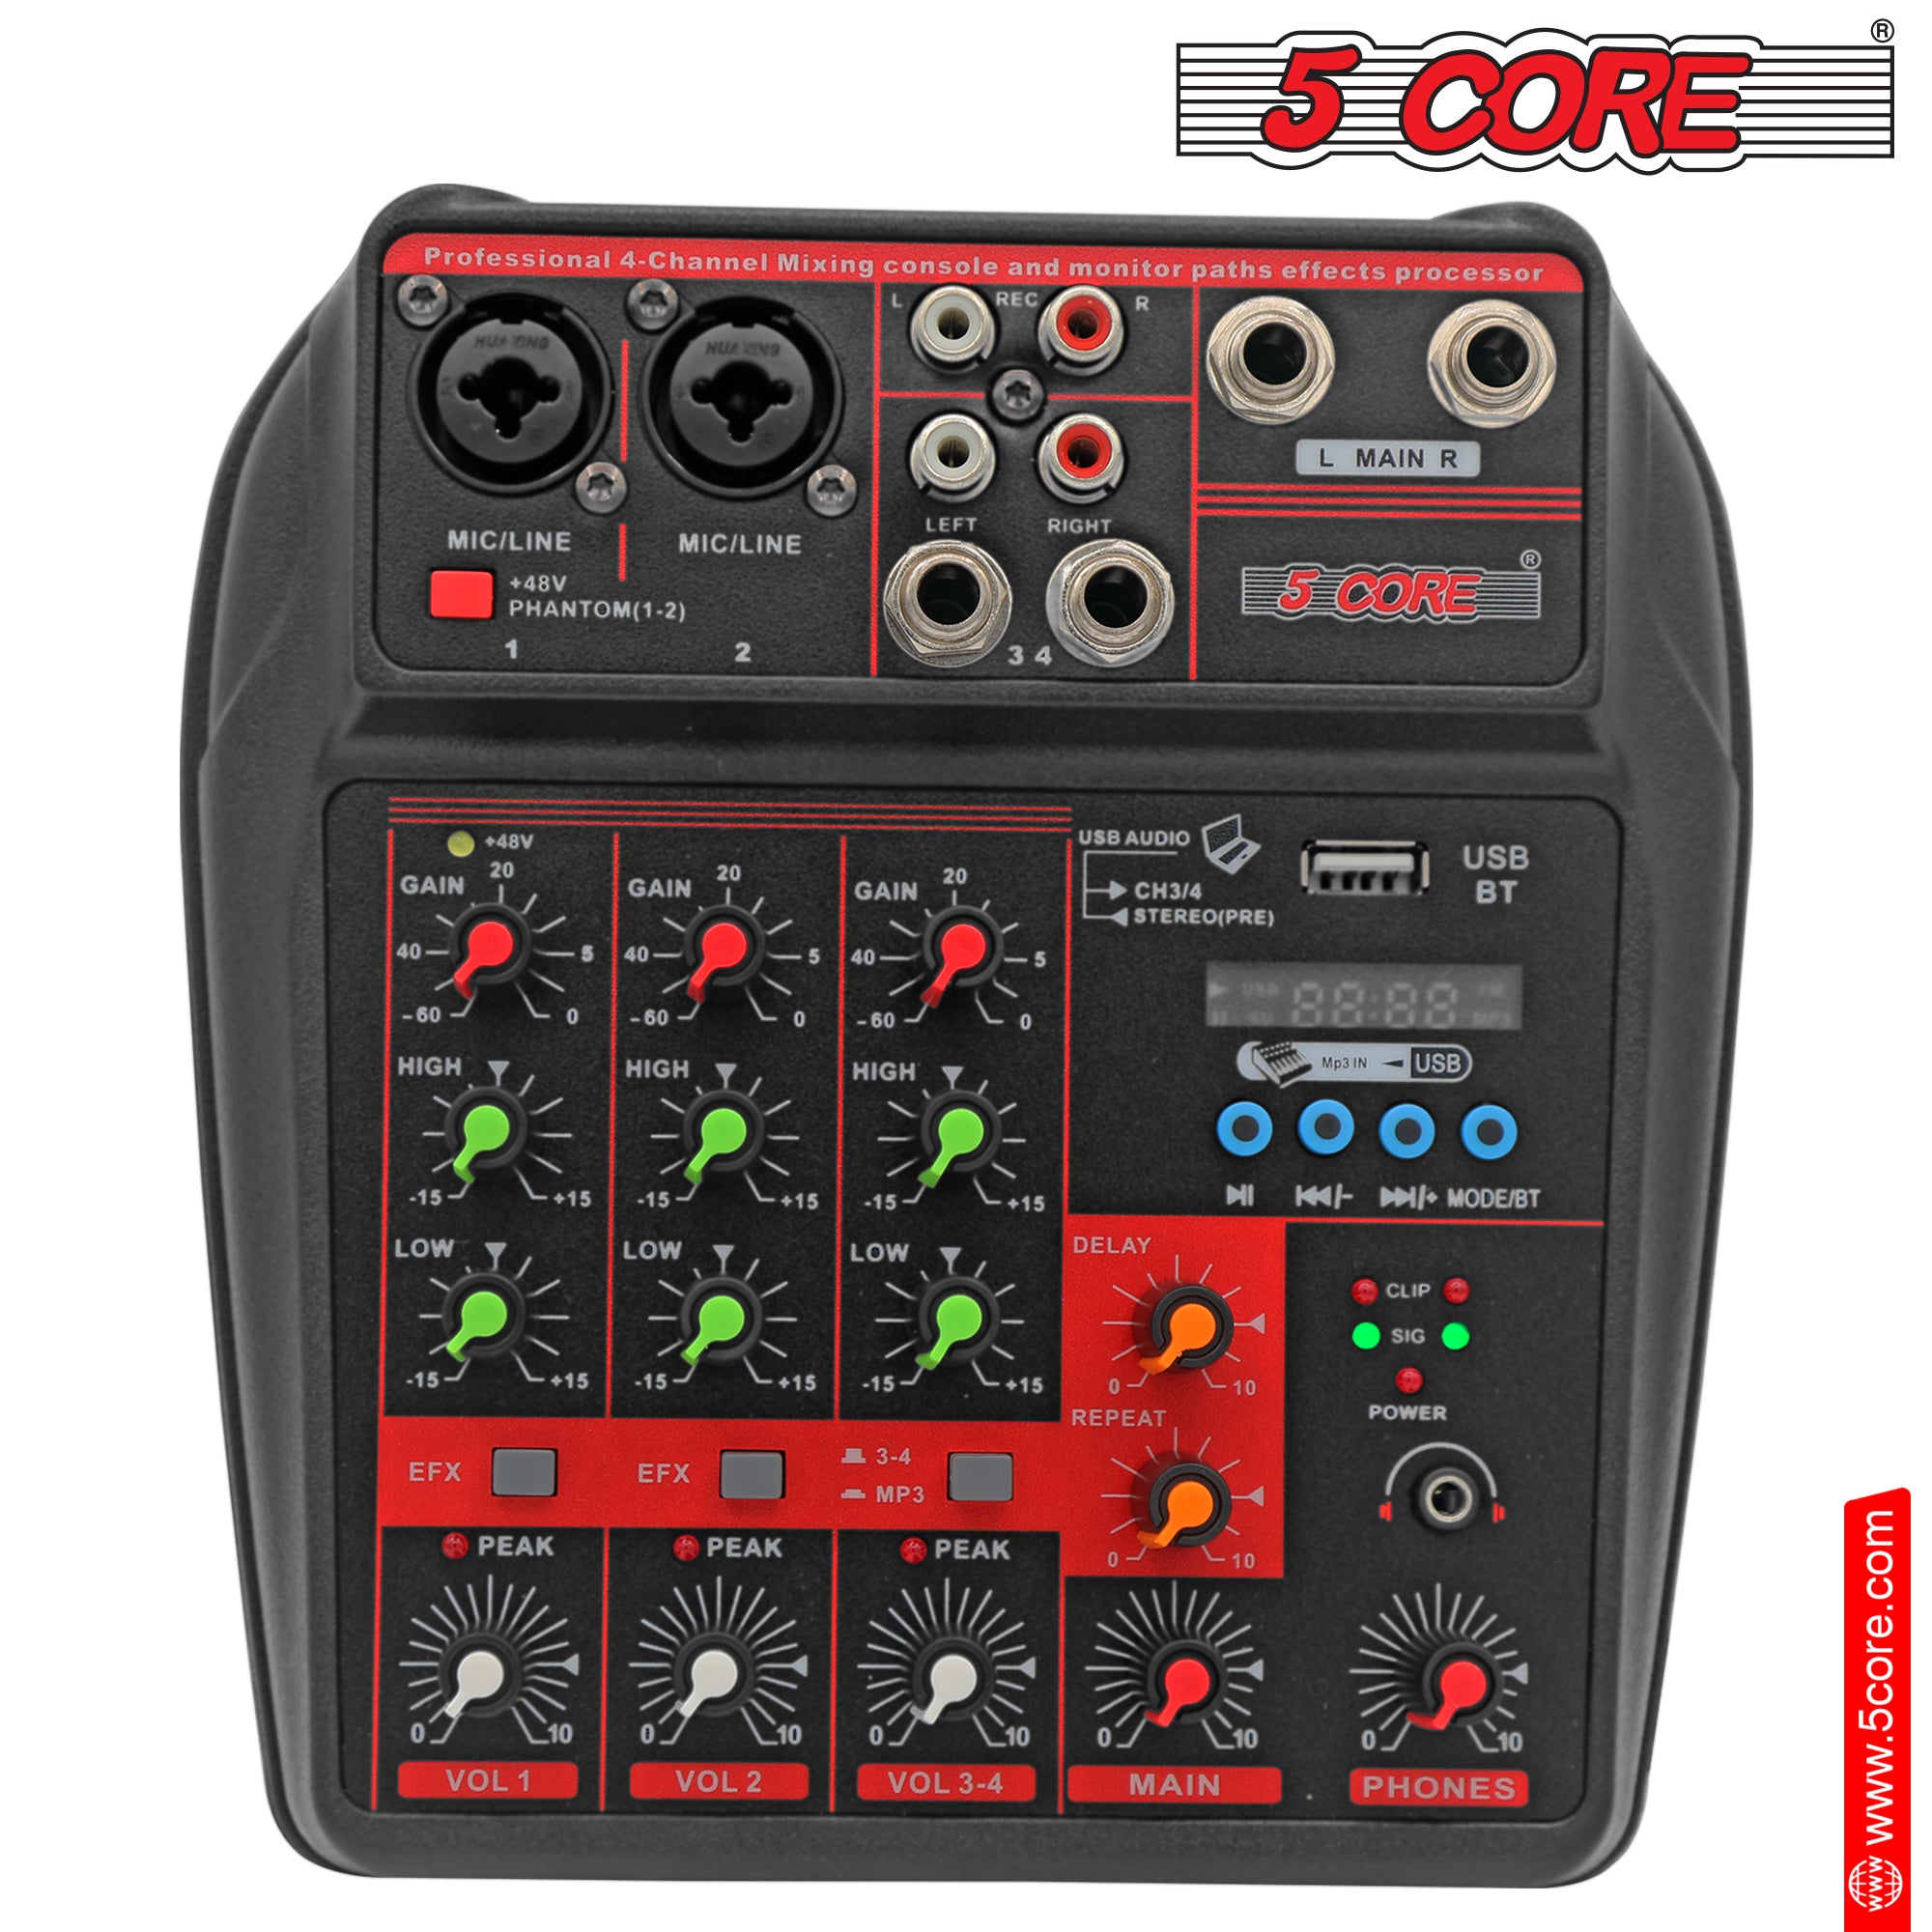 5 Core Audio Mixer Dj Mixer 4 Channel Sound Board w Built-in Effects & Usb Interface Bluetooth Reliale Karaoke Podcast Music Mixer -MX 4CH